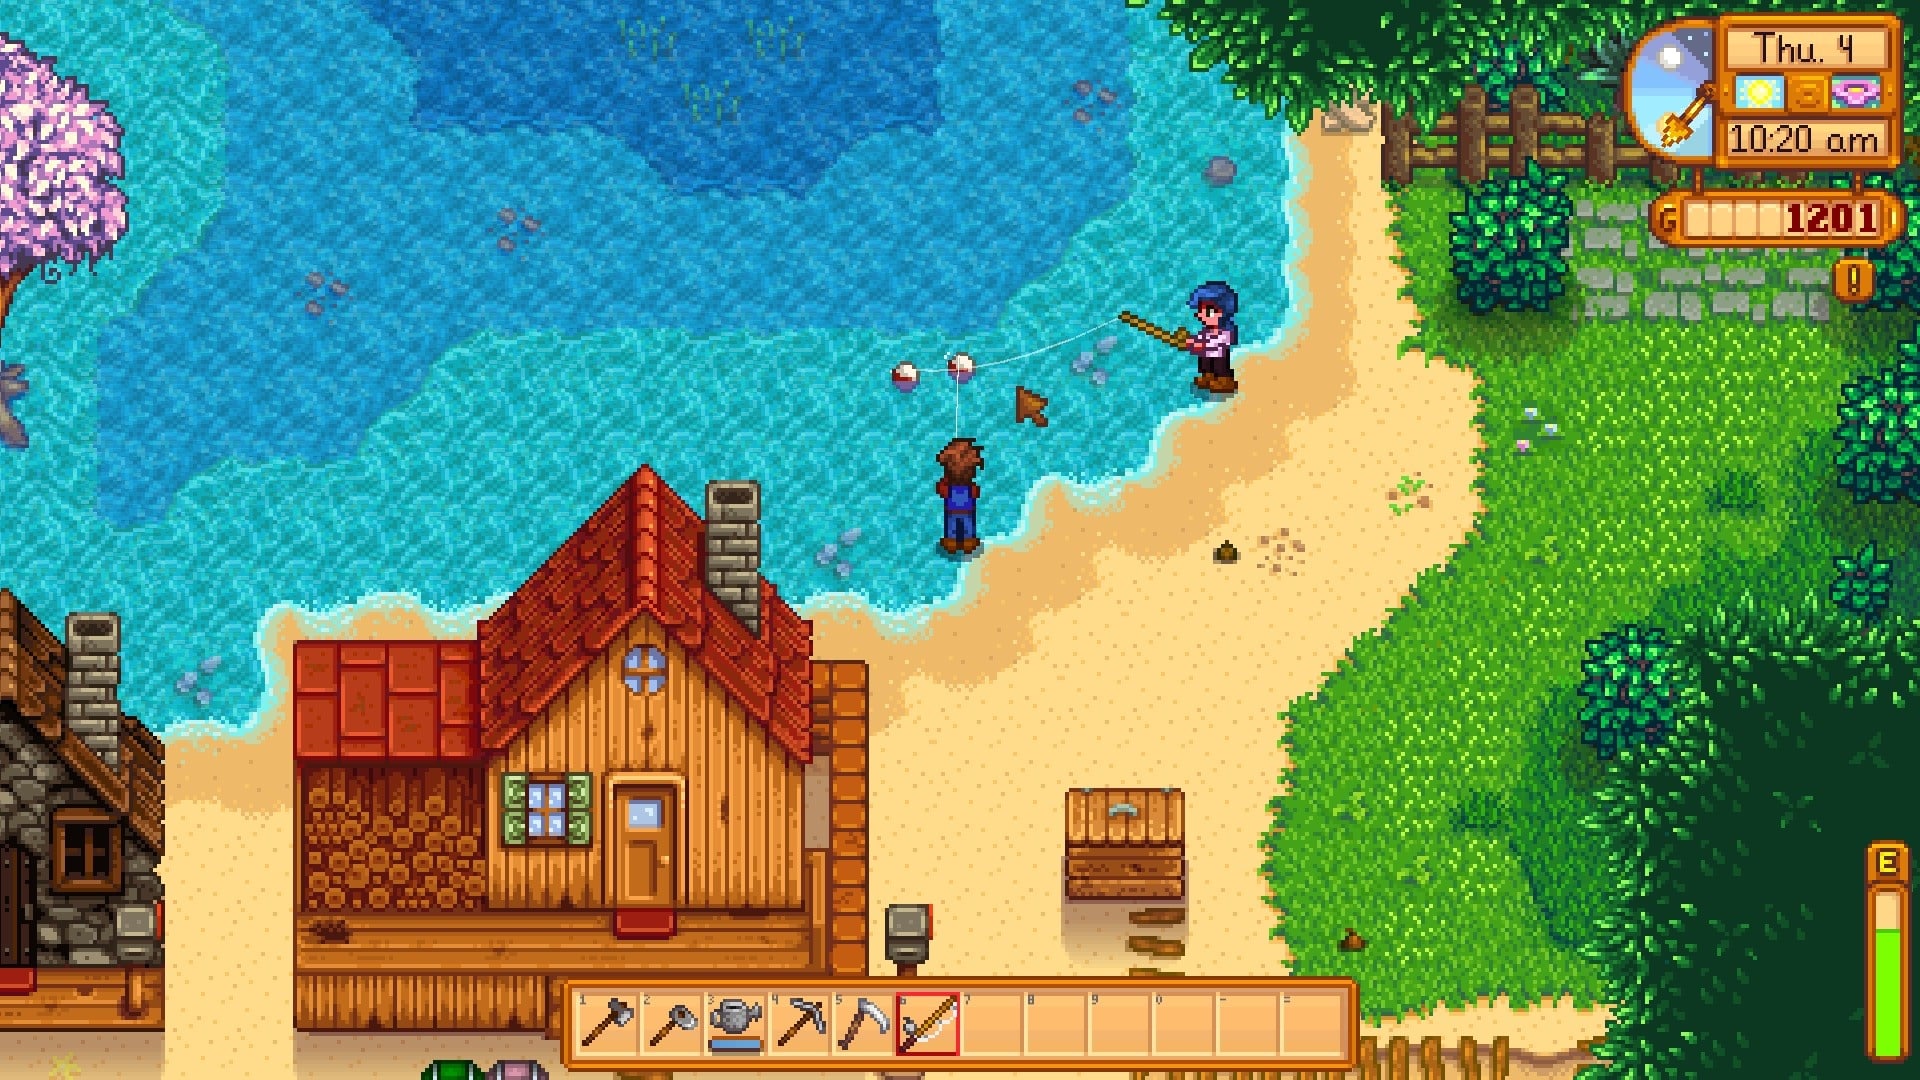 (In multiplayer mode we fish at the lake right next to our farm - the beach map makes it possible)